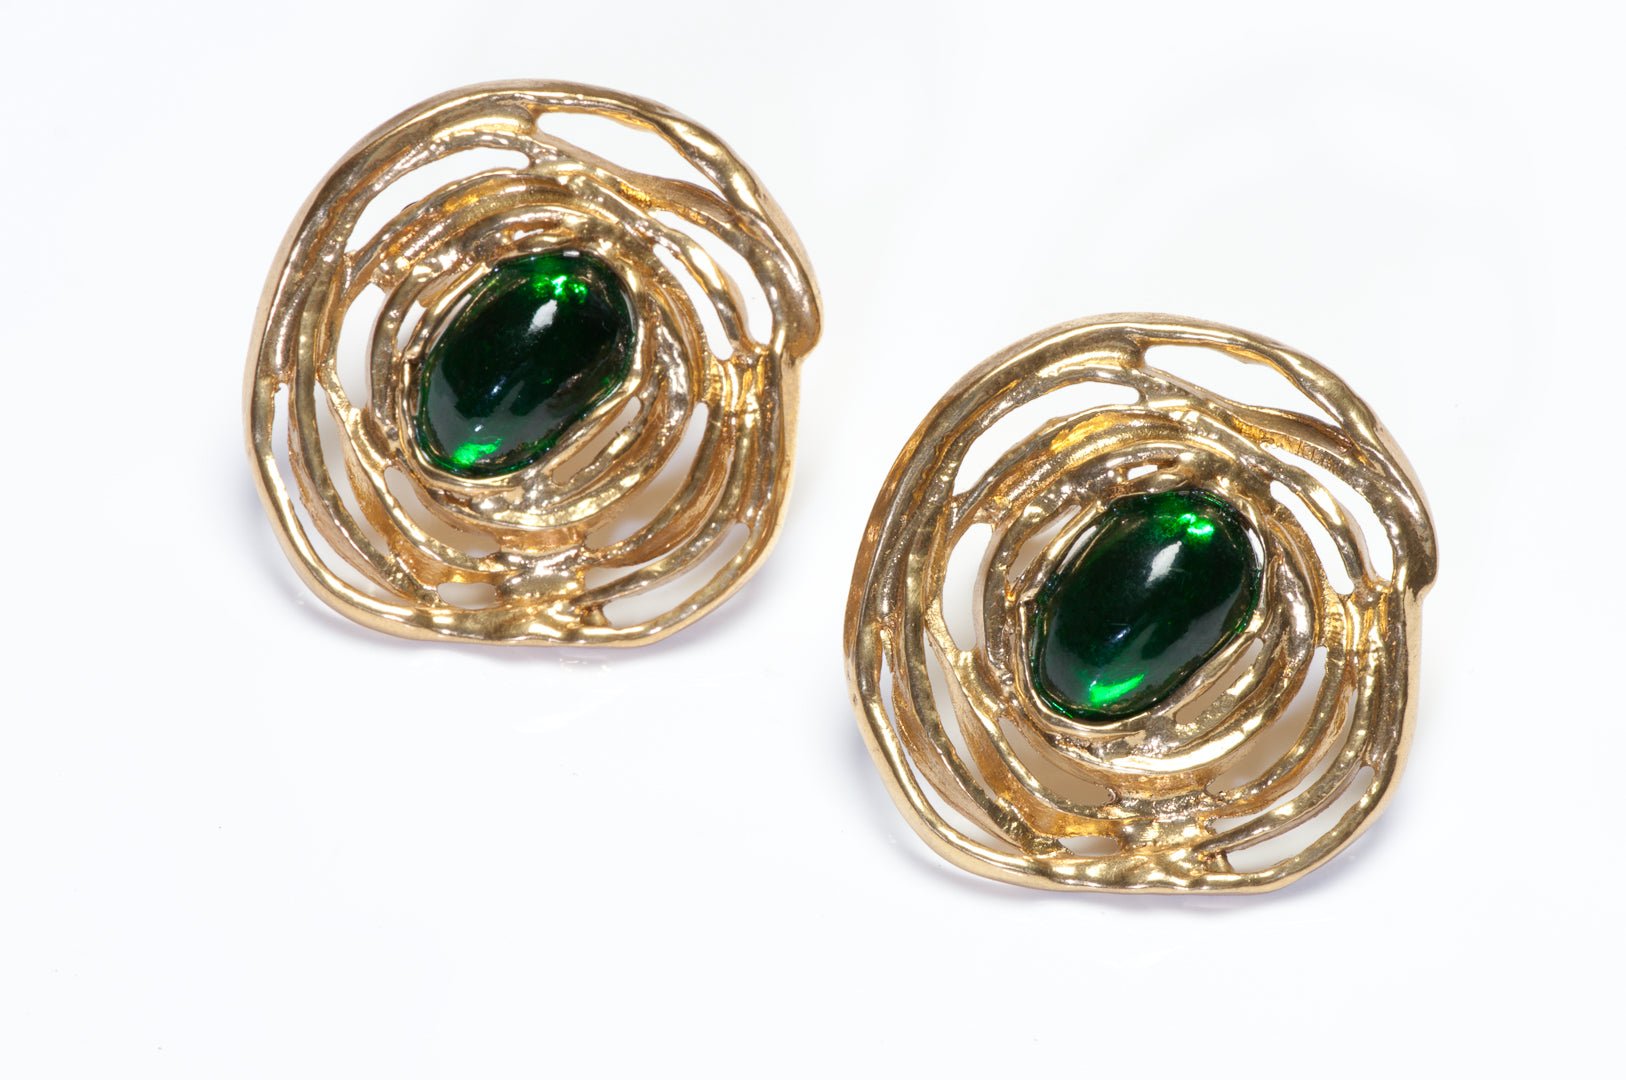 Vintage Yves Saint Laurent Large Gold Plated Green Cabochon Swirl Earrings